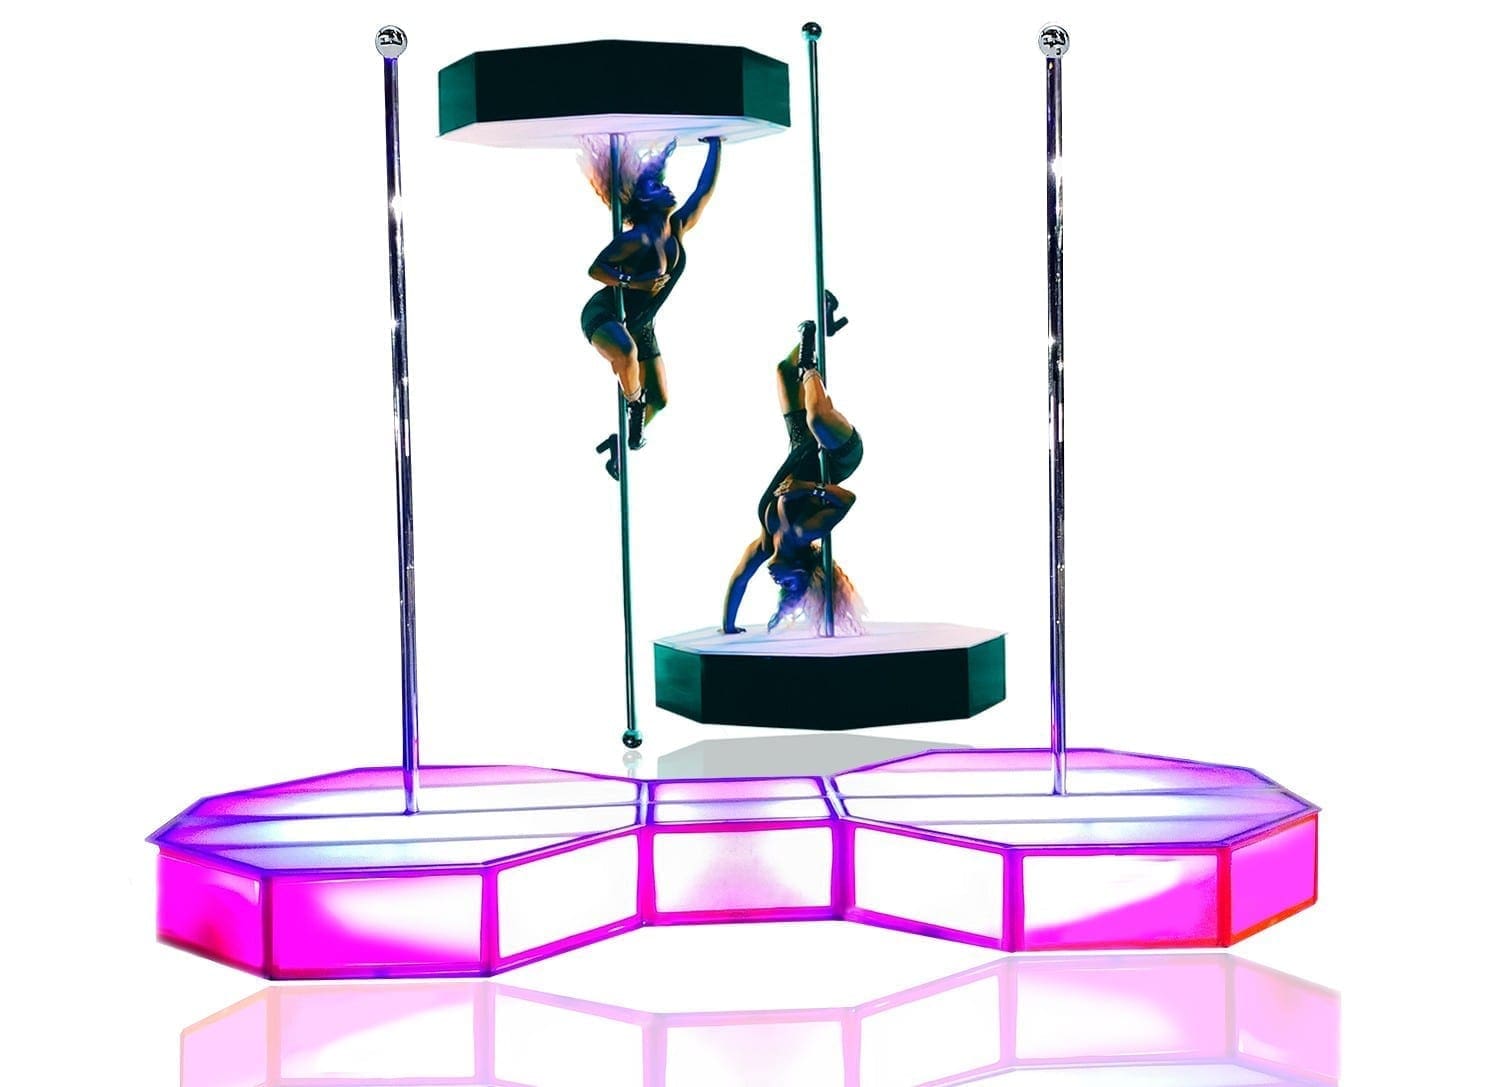 Renting Portable Stripper Poles for Your Bachelor Party ~ Trending